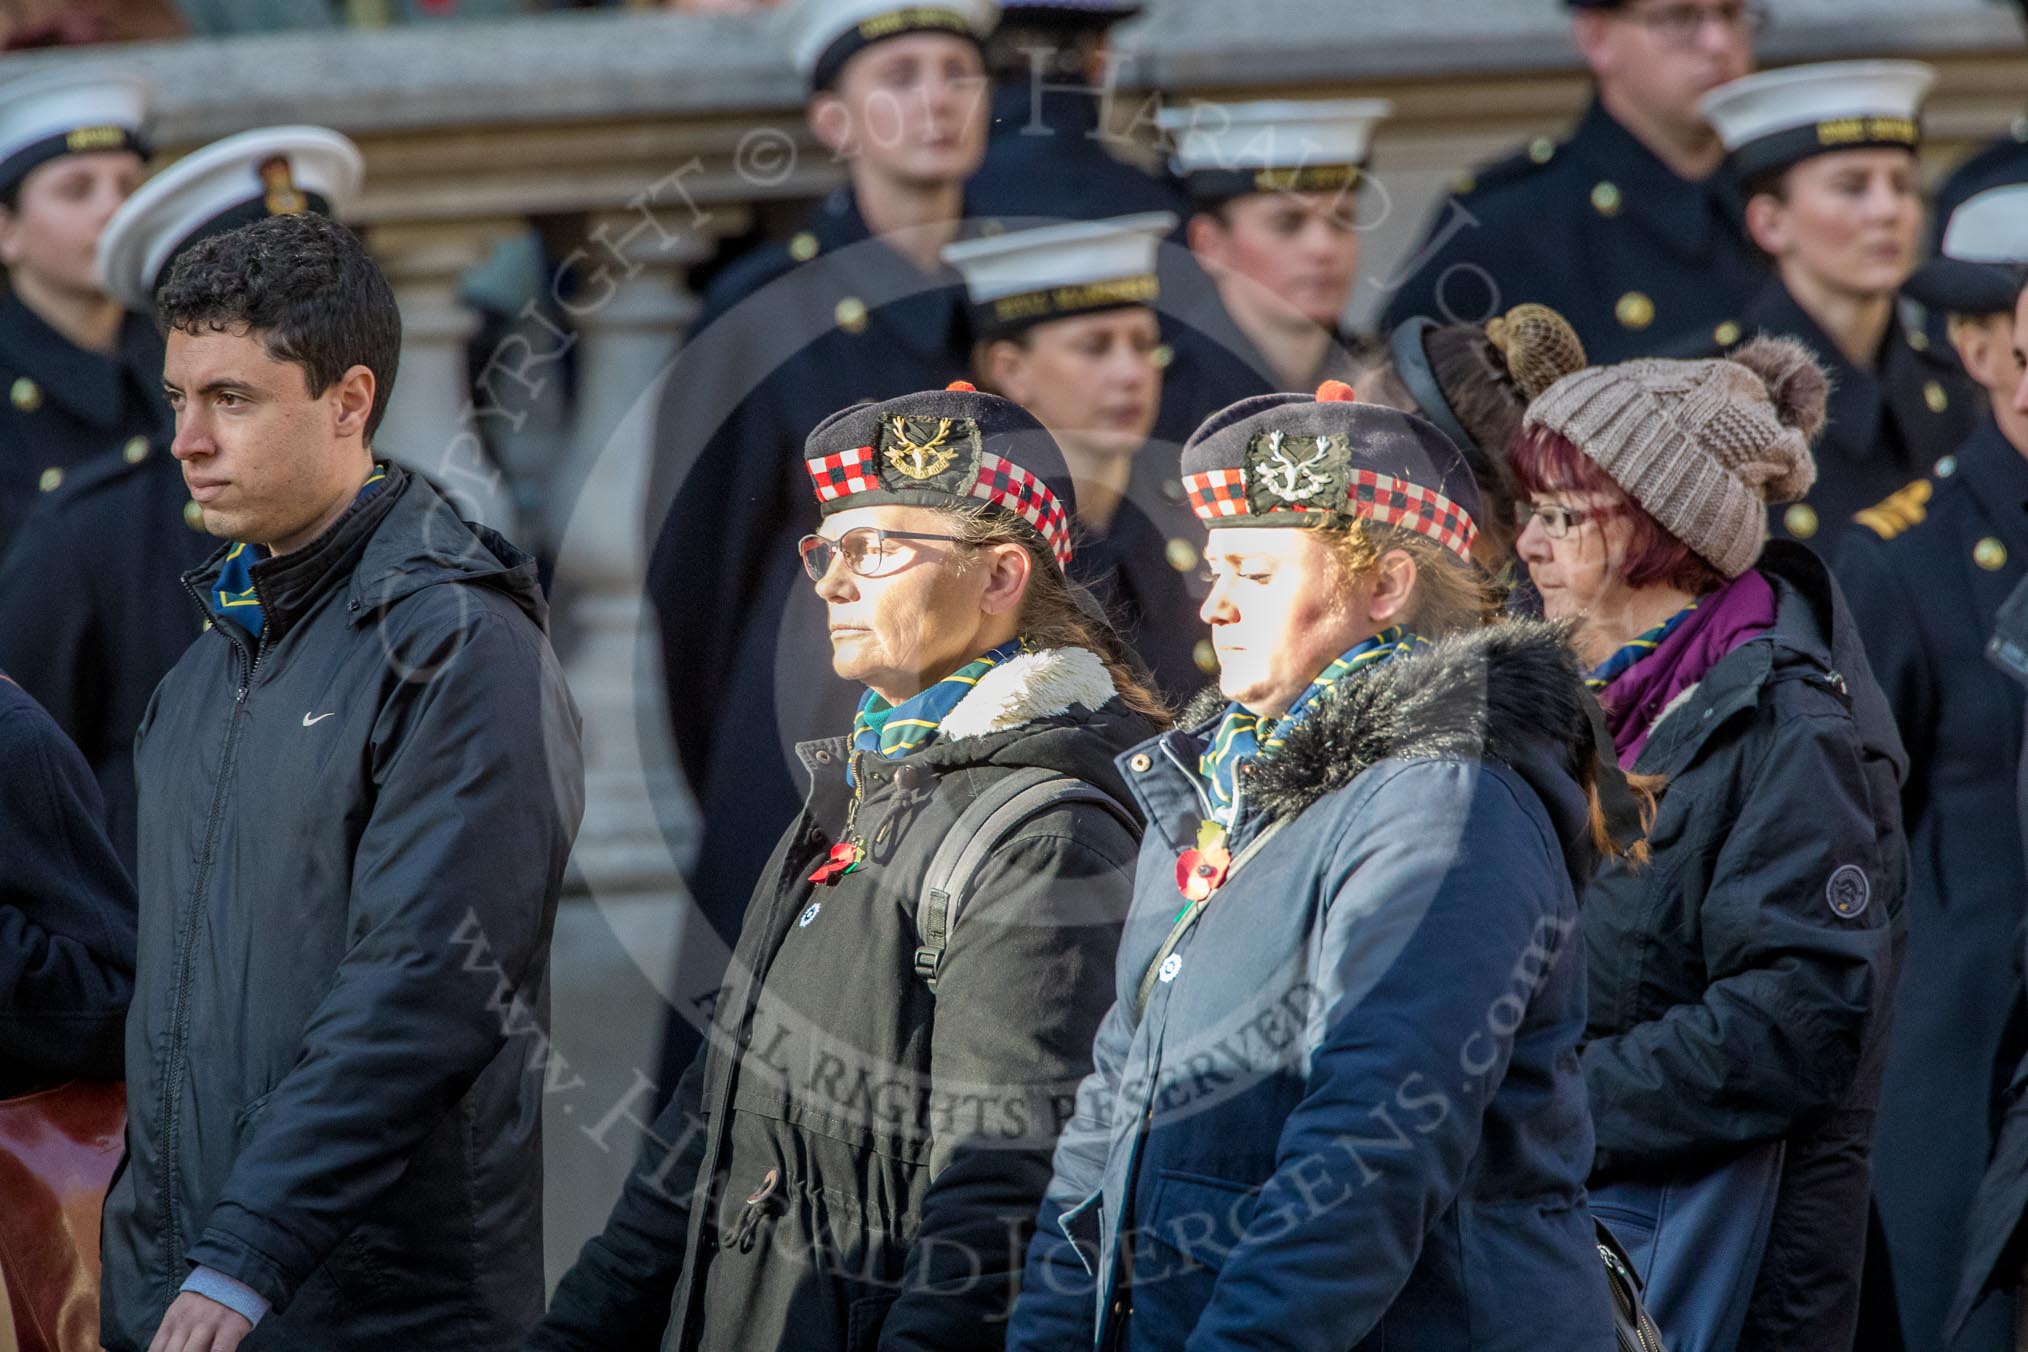 Gallipoli & Dardanelles International (Group M25, 21 members) during the Royal British Legion March Past on Remembrance Sunday at the Cenotaph, Whitehall, Westminster, London, 11 November 2018, 12:28.